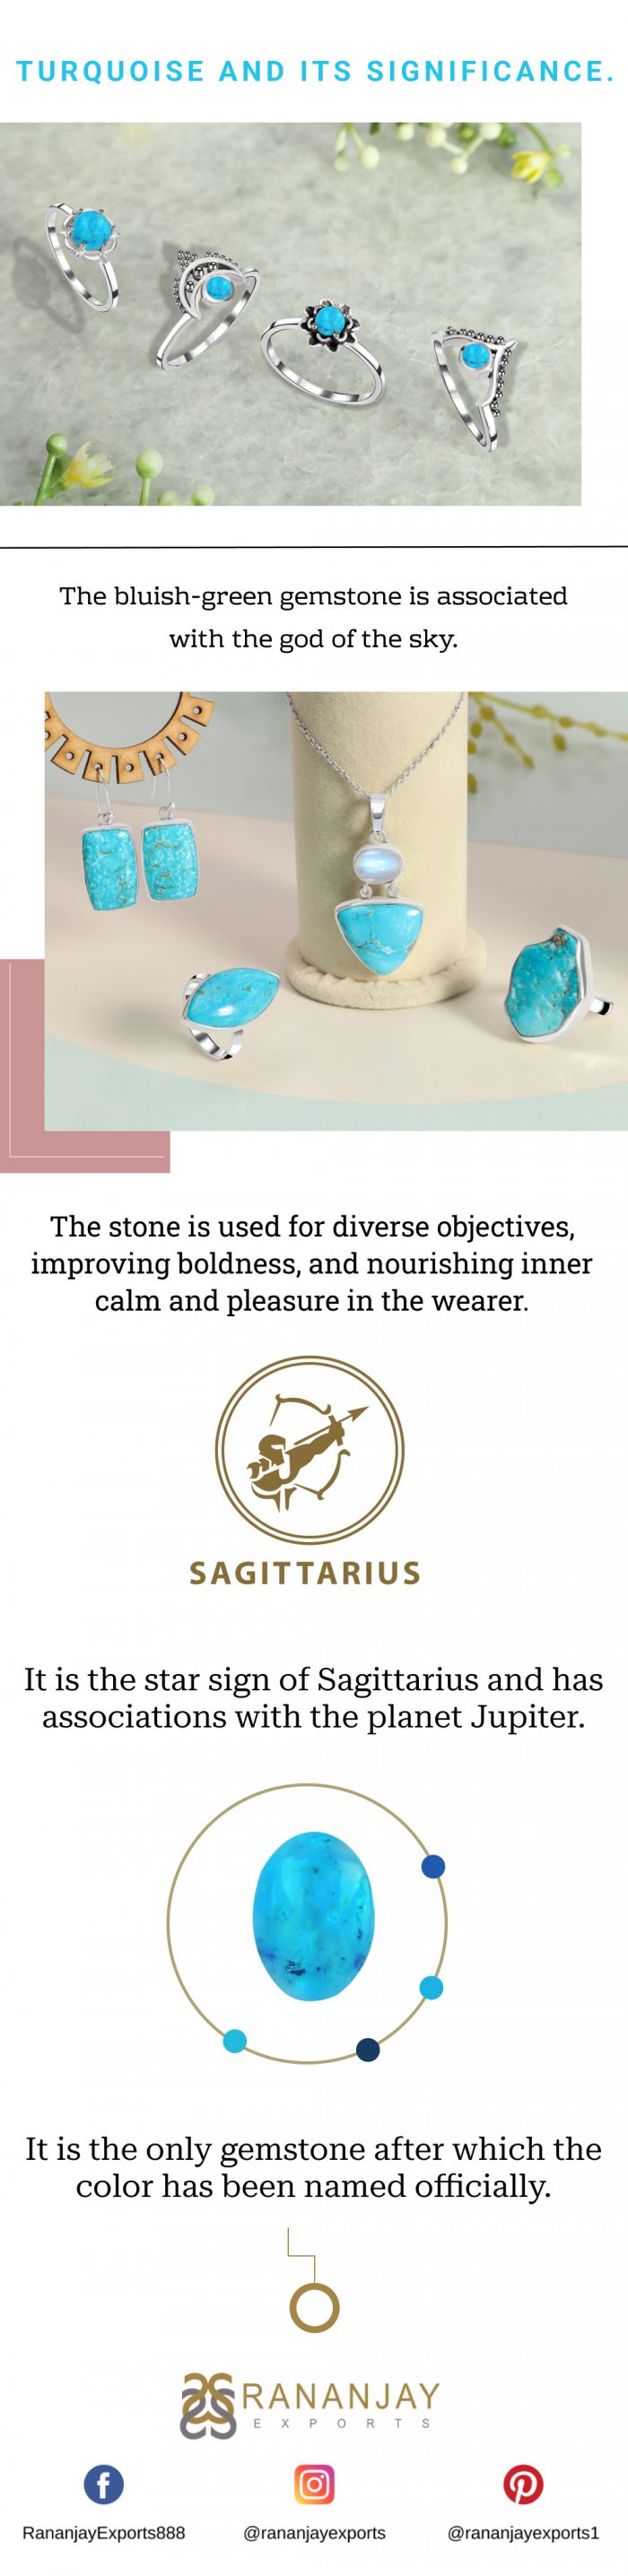 Turquoise and its significance.